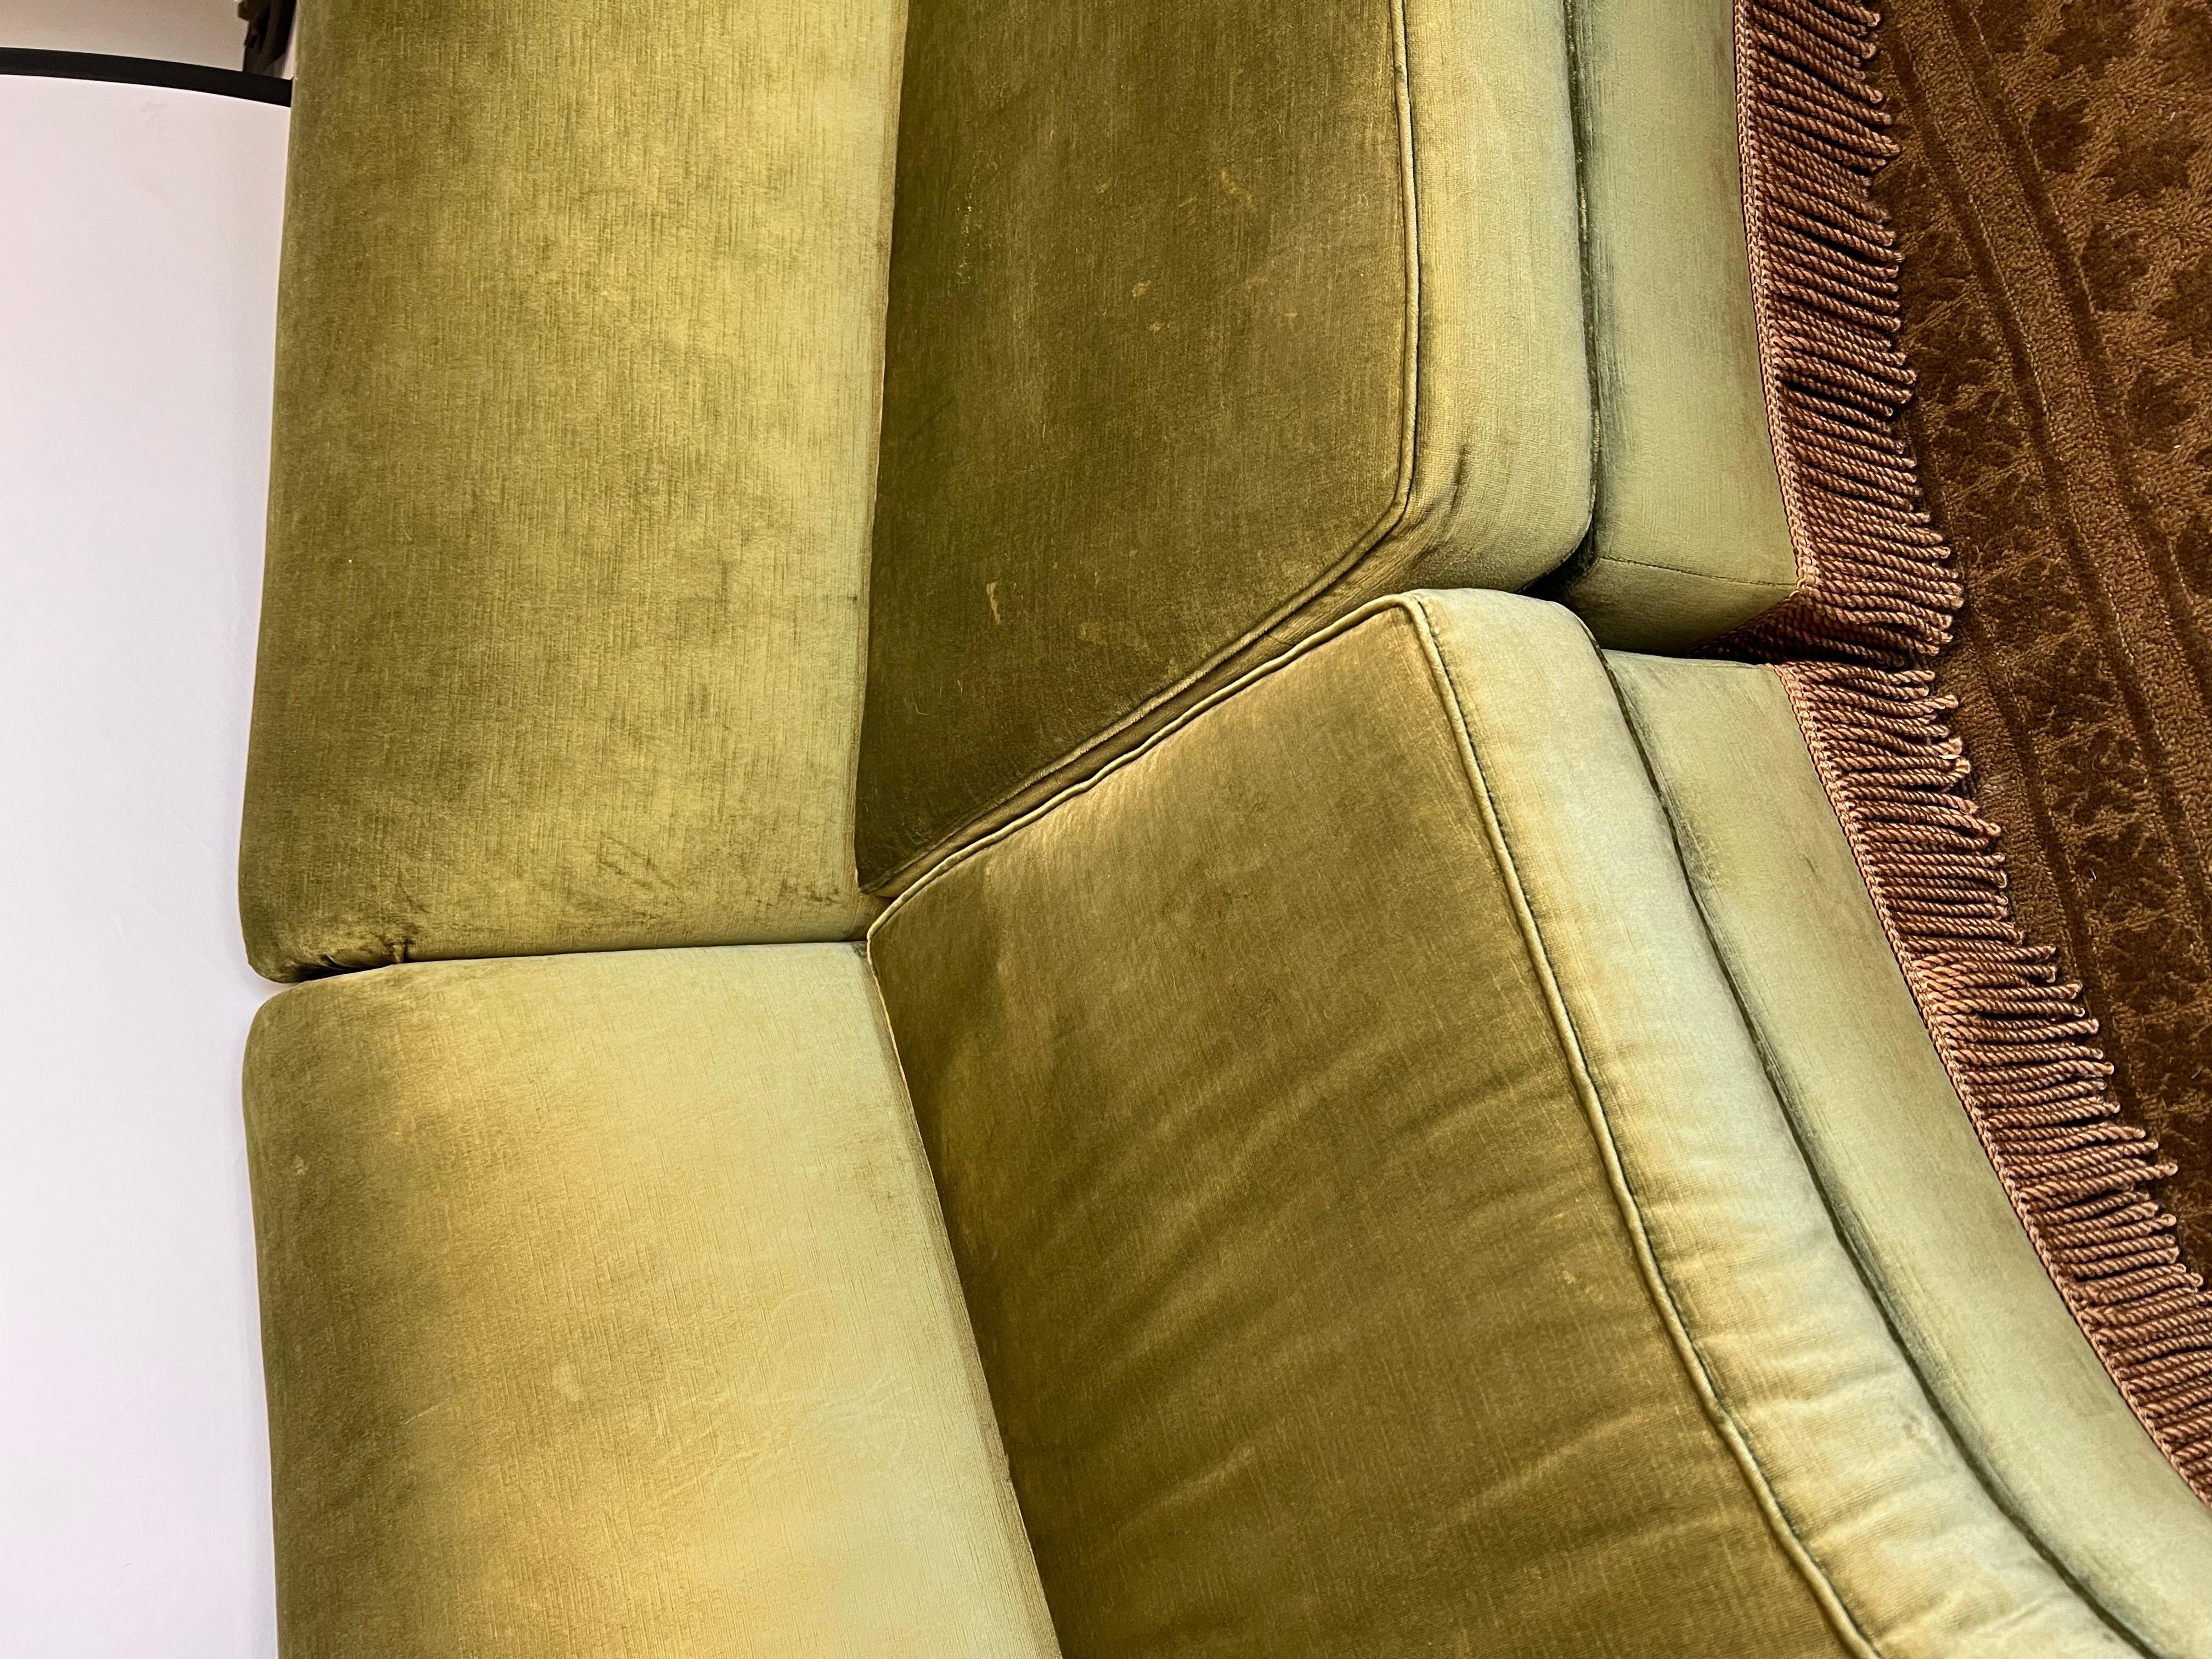 Exquisite art deco style 2 pc curved sofa has luxurious olive green velvet with gold tassel fringe. It is button tufted inside arms.
Front to back depth is 47